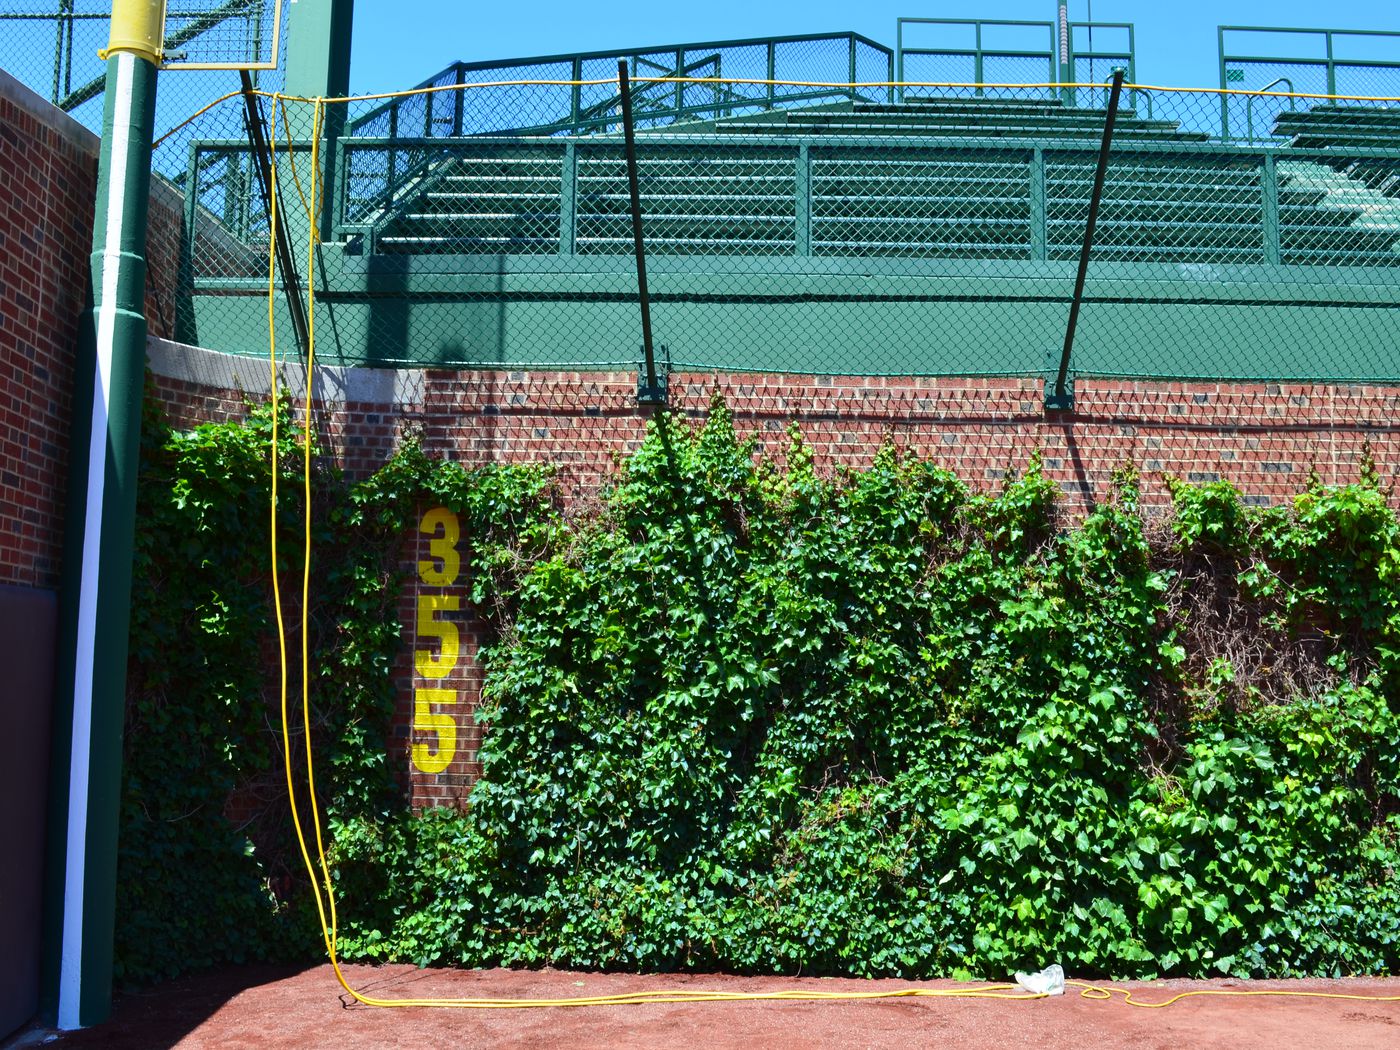 The wrigley field ivy and the new left